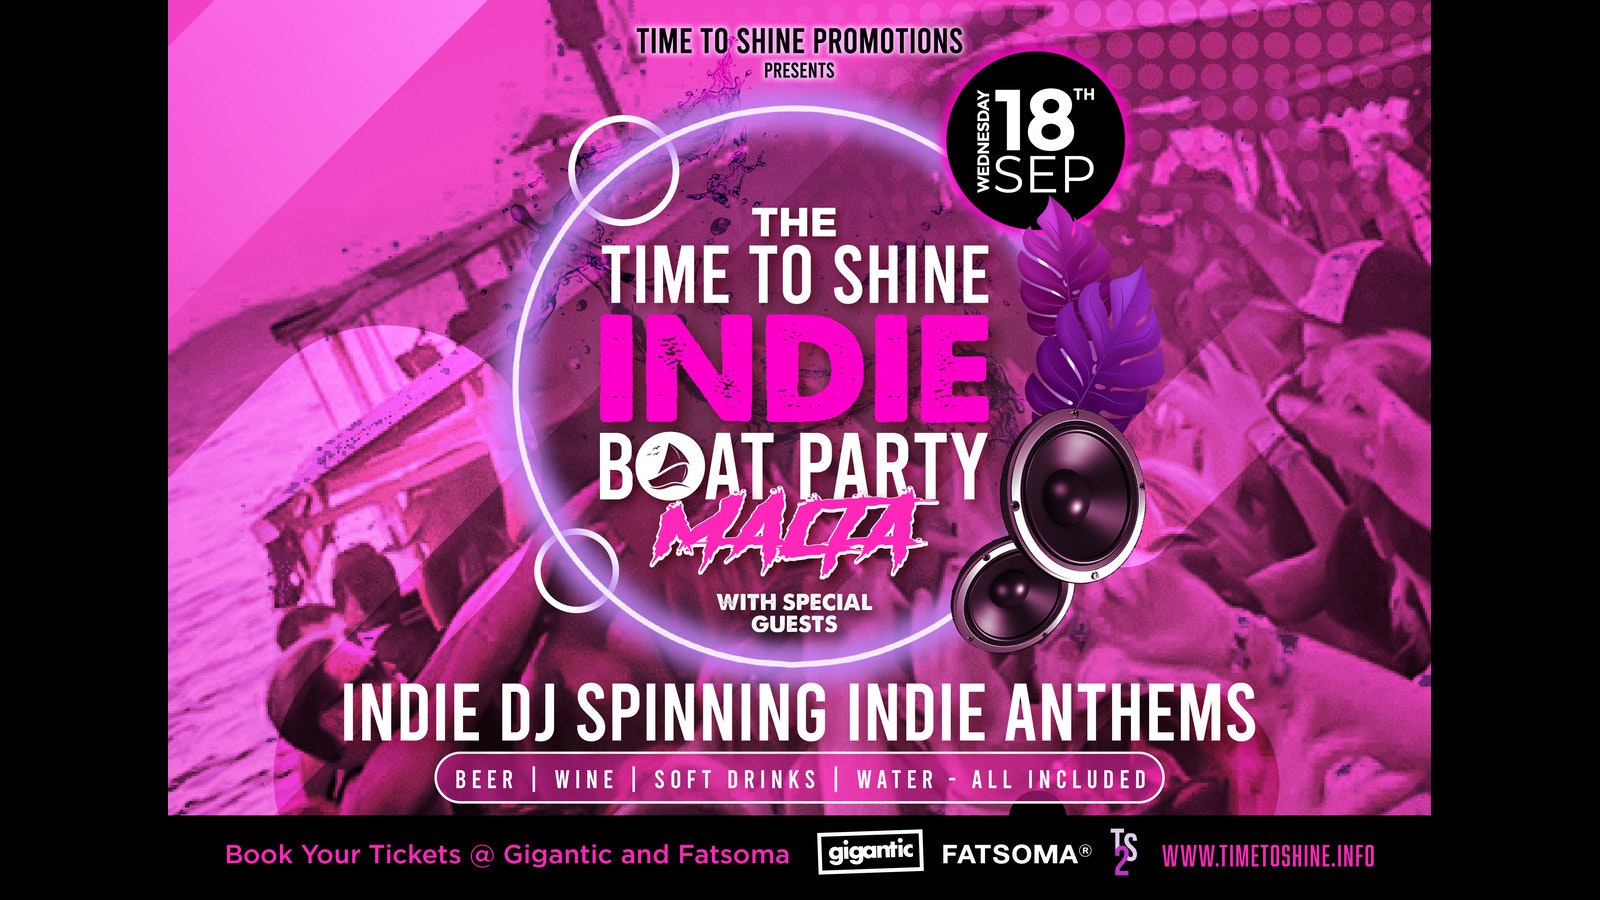 Time To Shine Promotions presents, THE TIME TO SHINE INDIE BOAT PARTY – MALTA